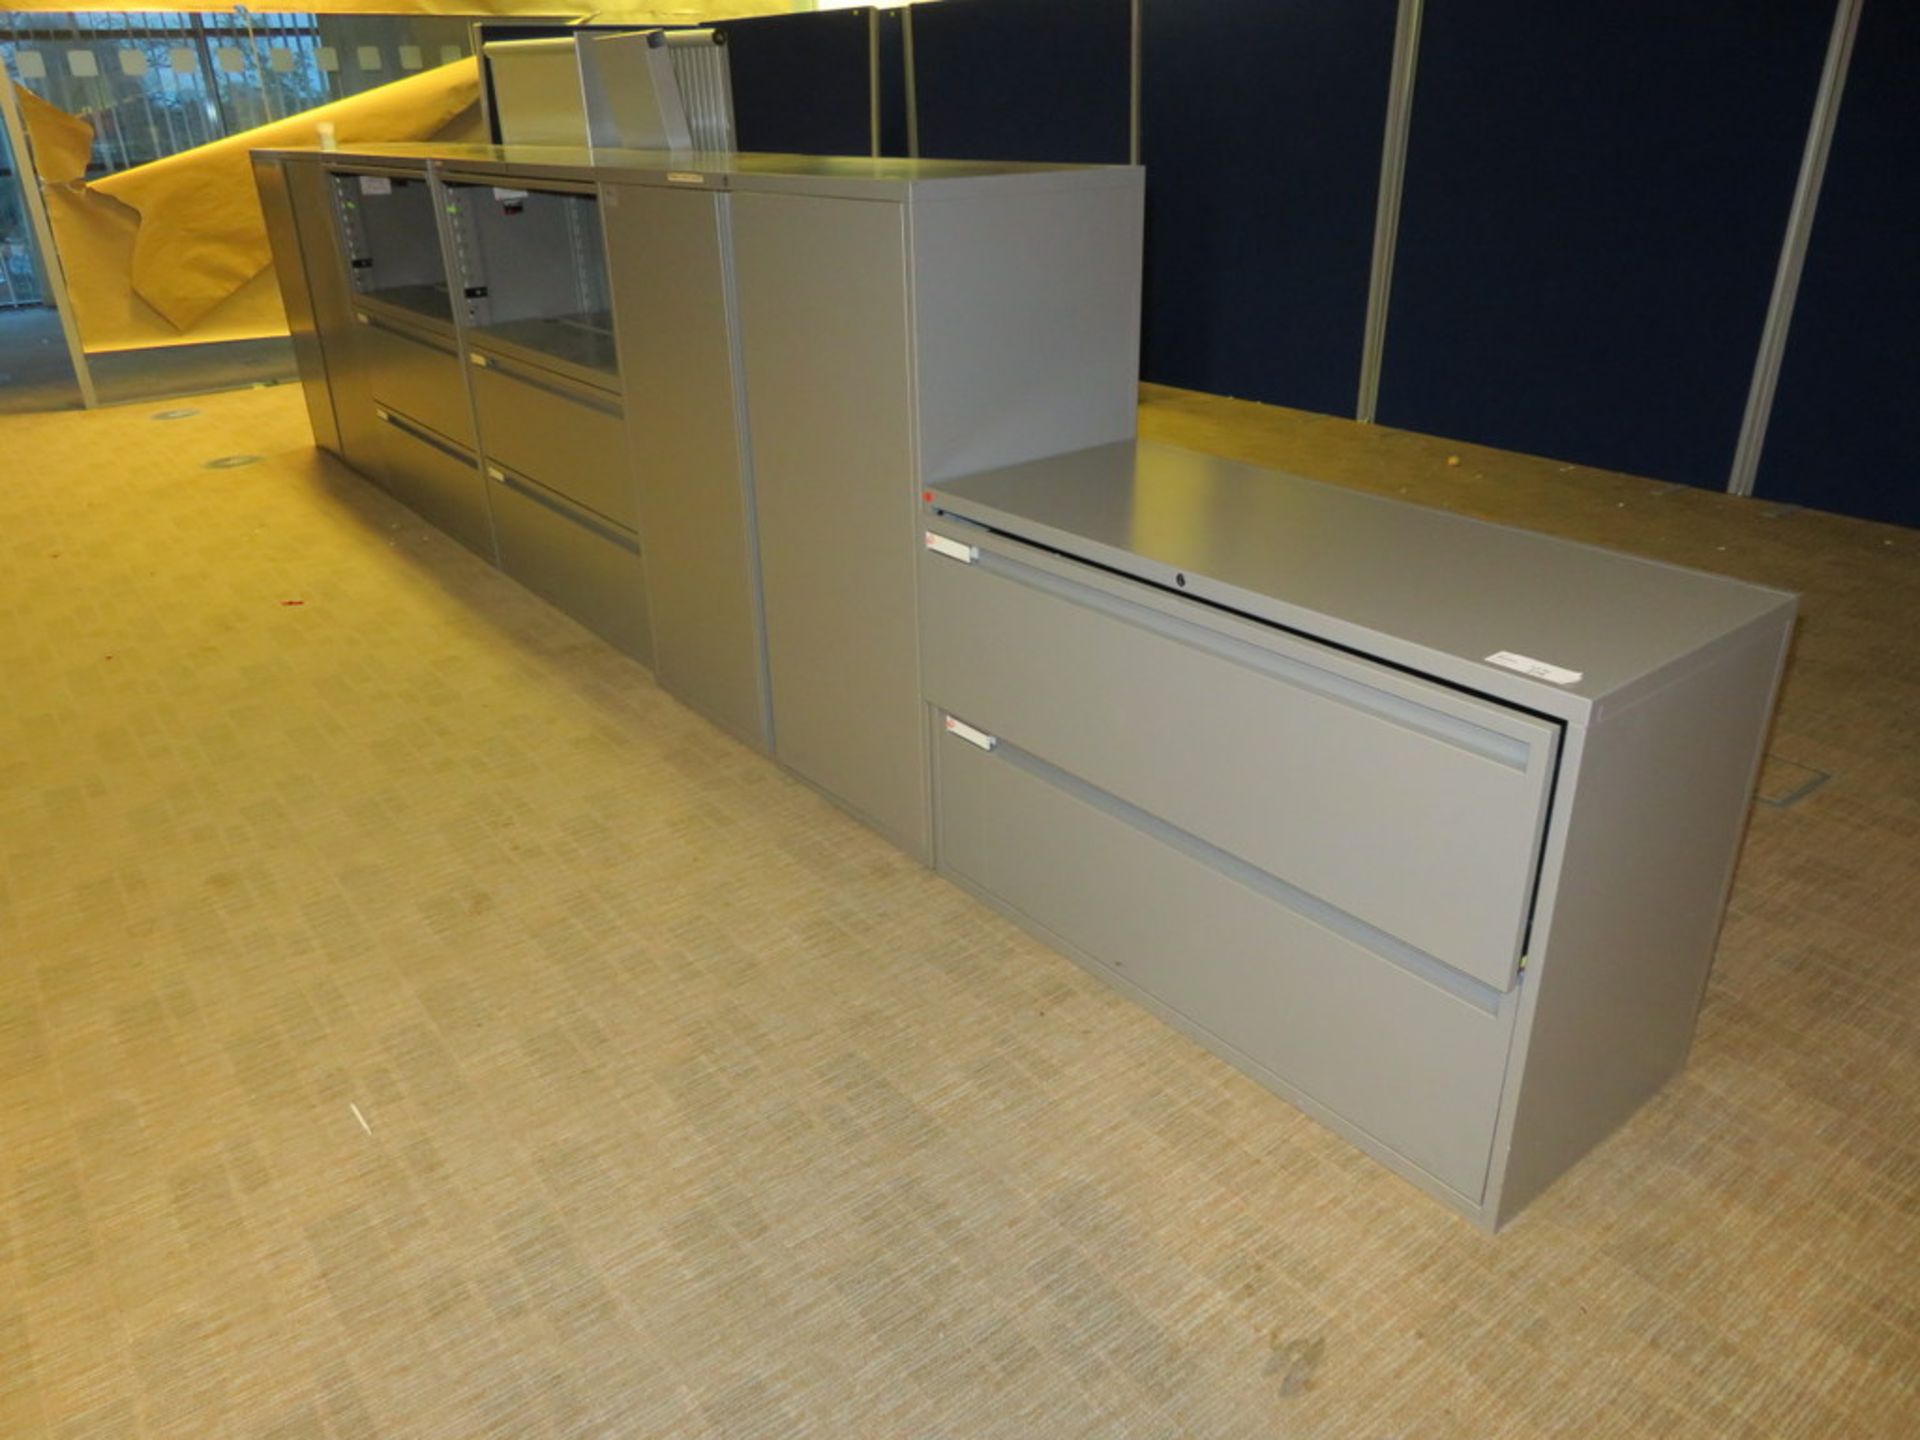 2 X GREY METAL STATIONERY CABINETS AND 3 X FILING UNITS